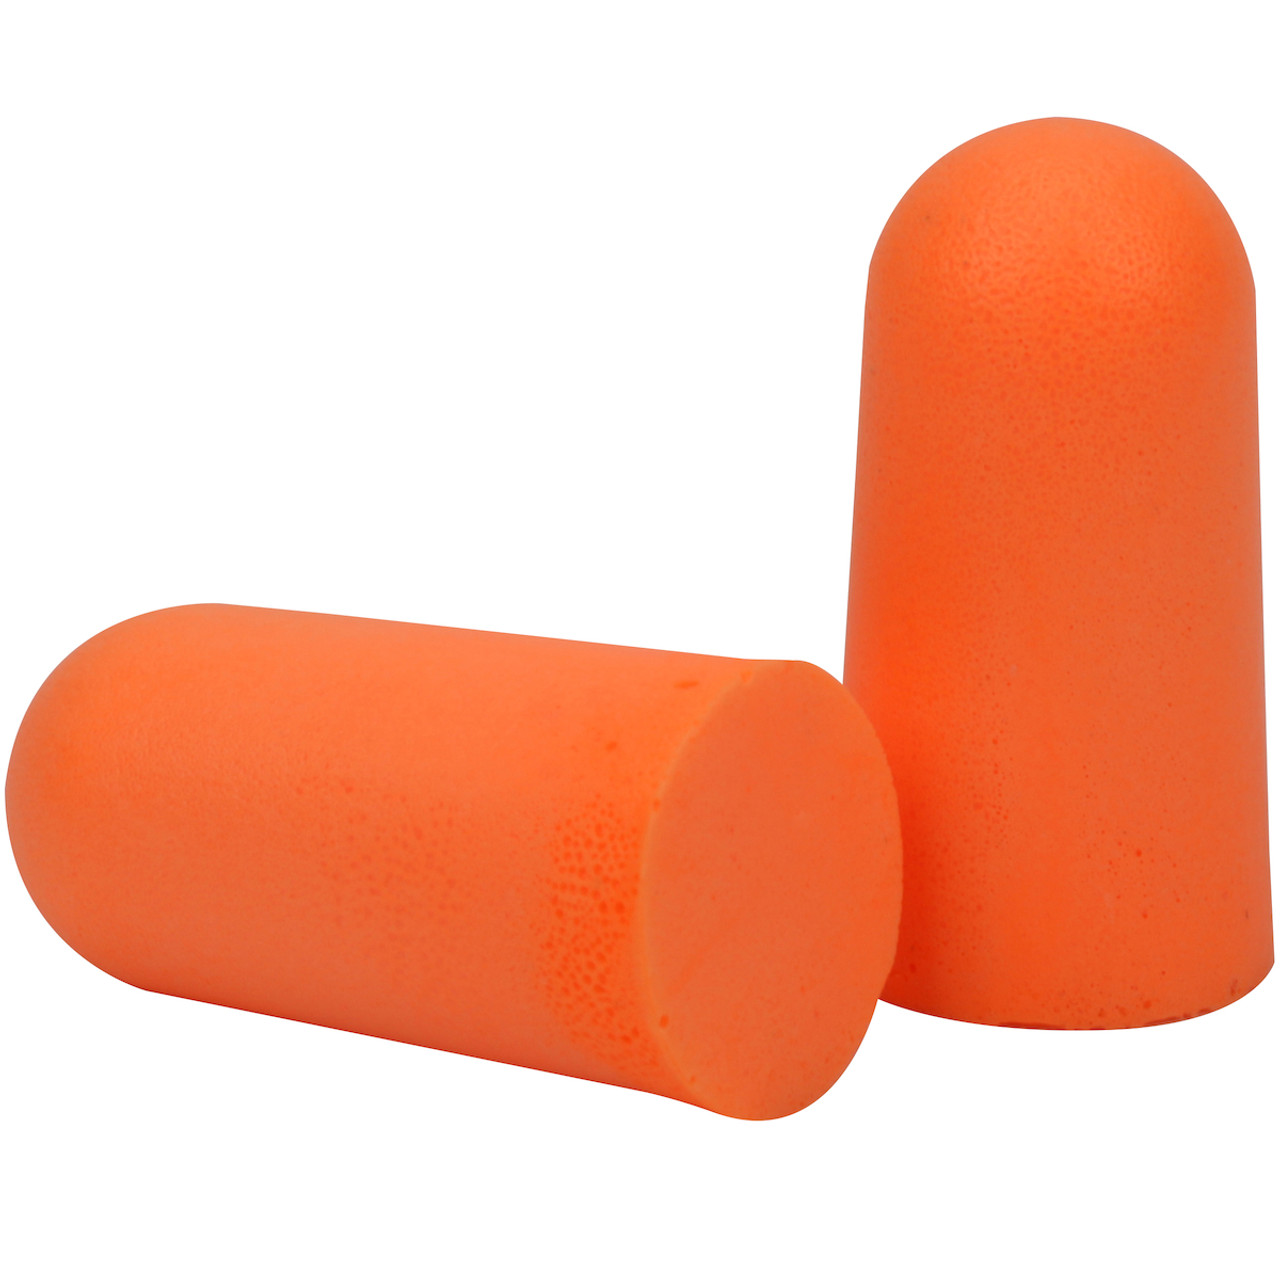 How to Put In Earplugs - PK Safety Supply